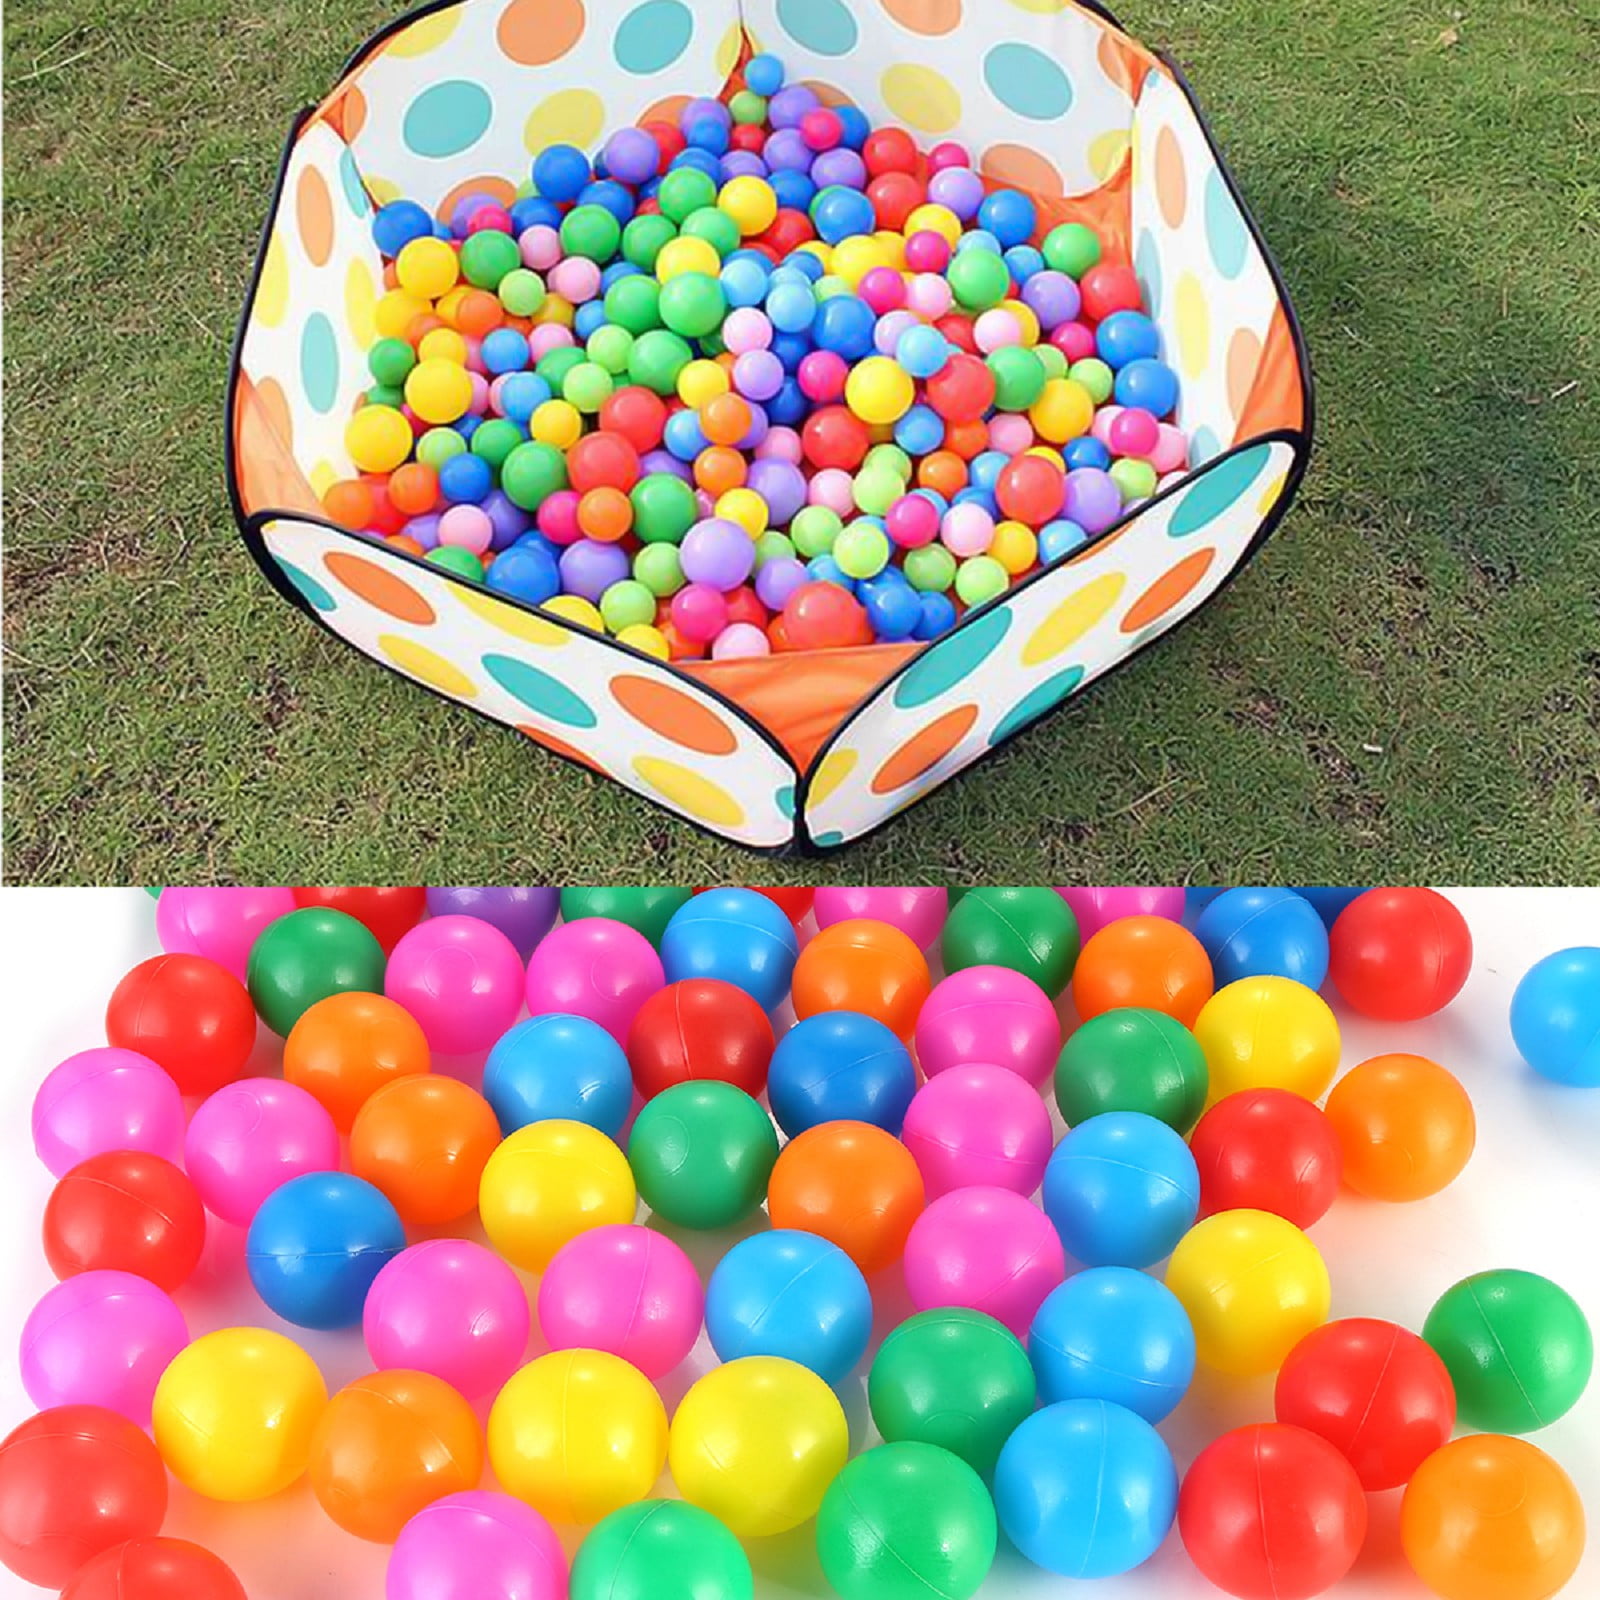 Mickey Mouse 94785 Ball Pit 20 Soft-Flex Balls 1 Inflatable 